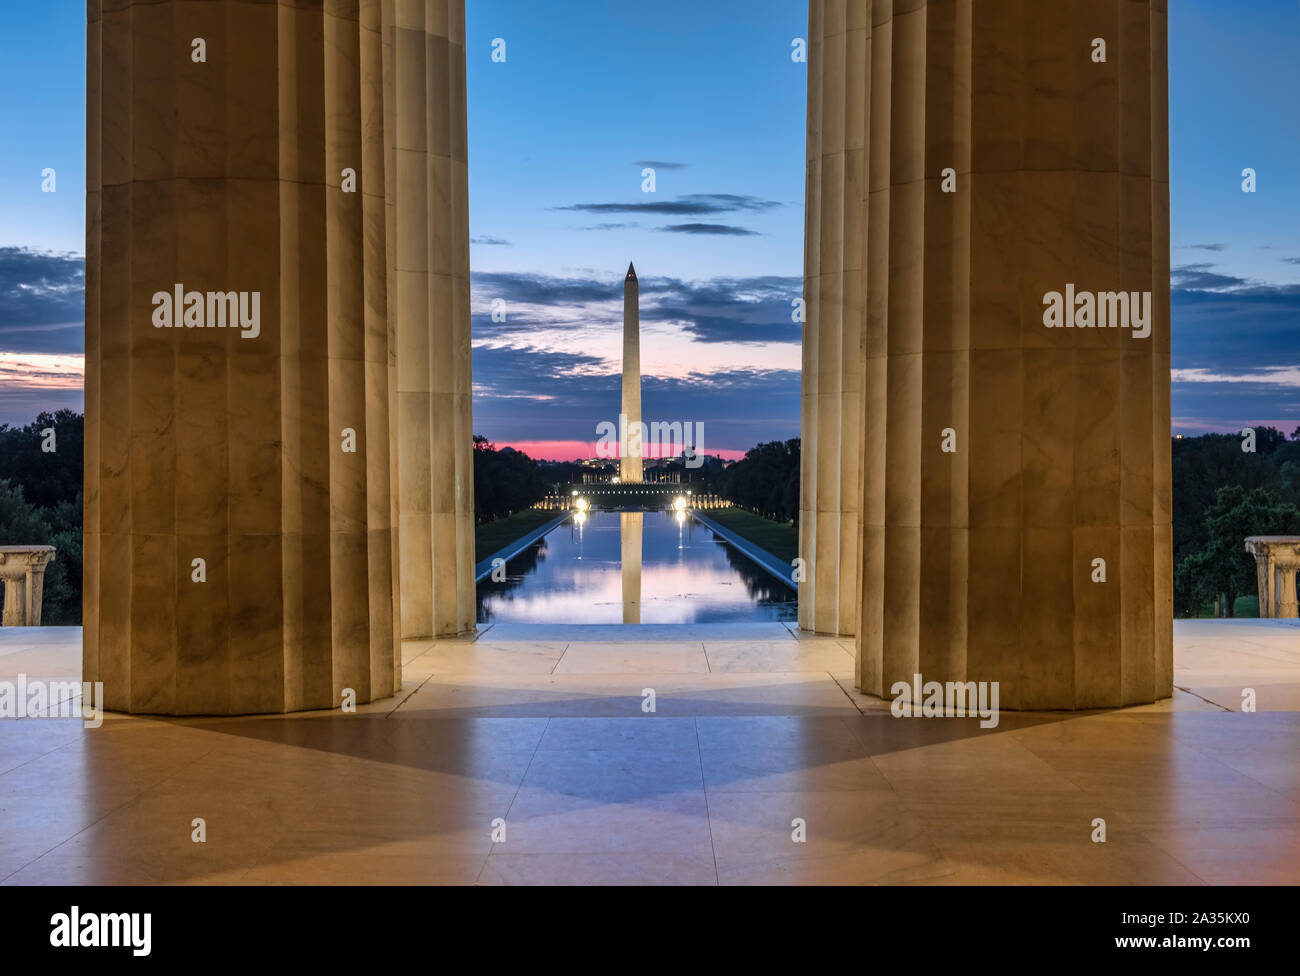 The Washington Monument and Reflection Pool from inside the Lincoln Memorial, National Mall, Washington DC, USA Stock Photo